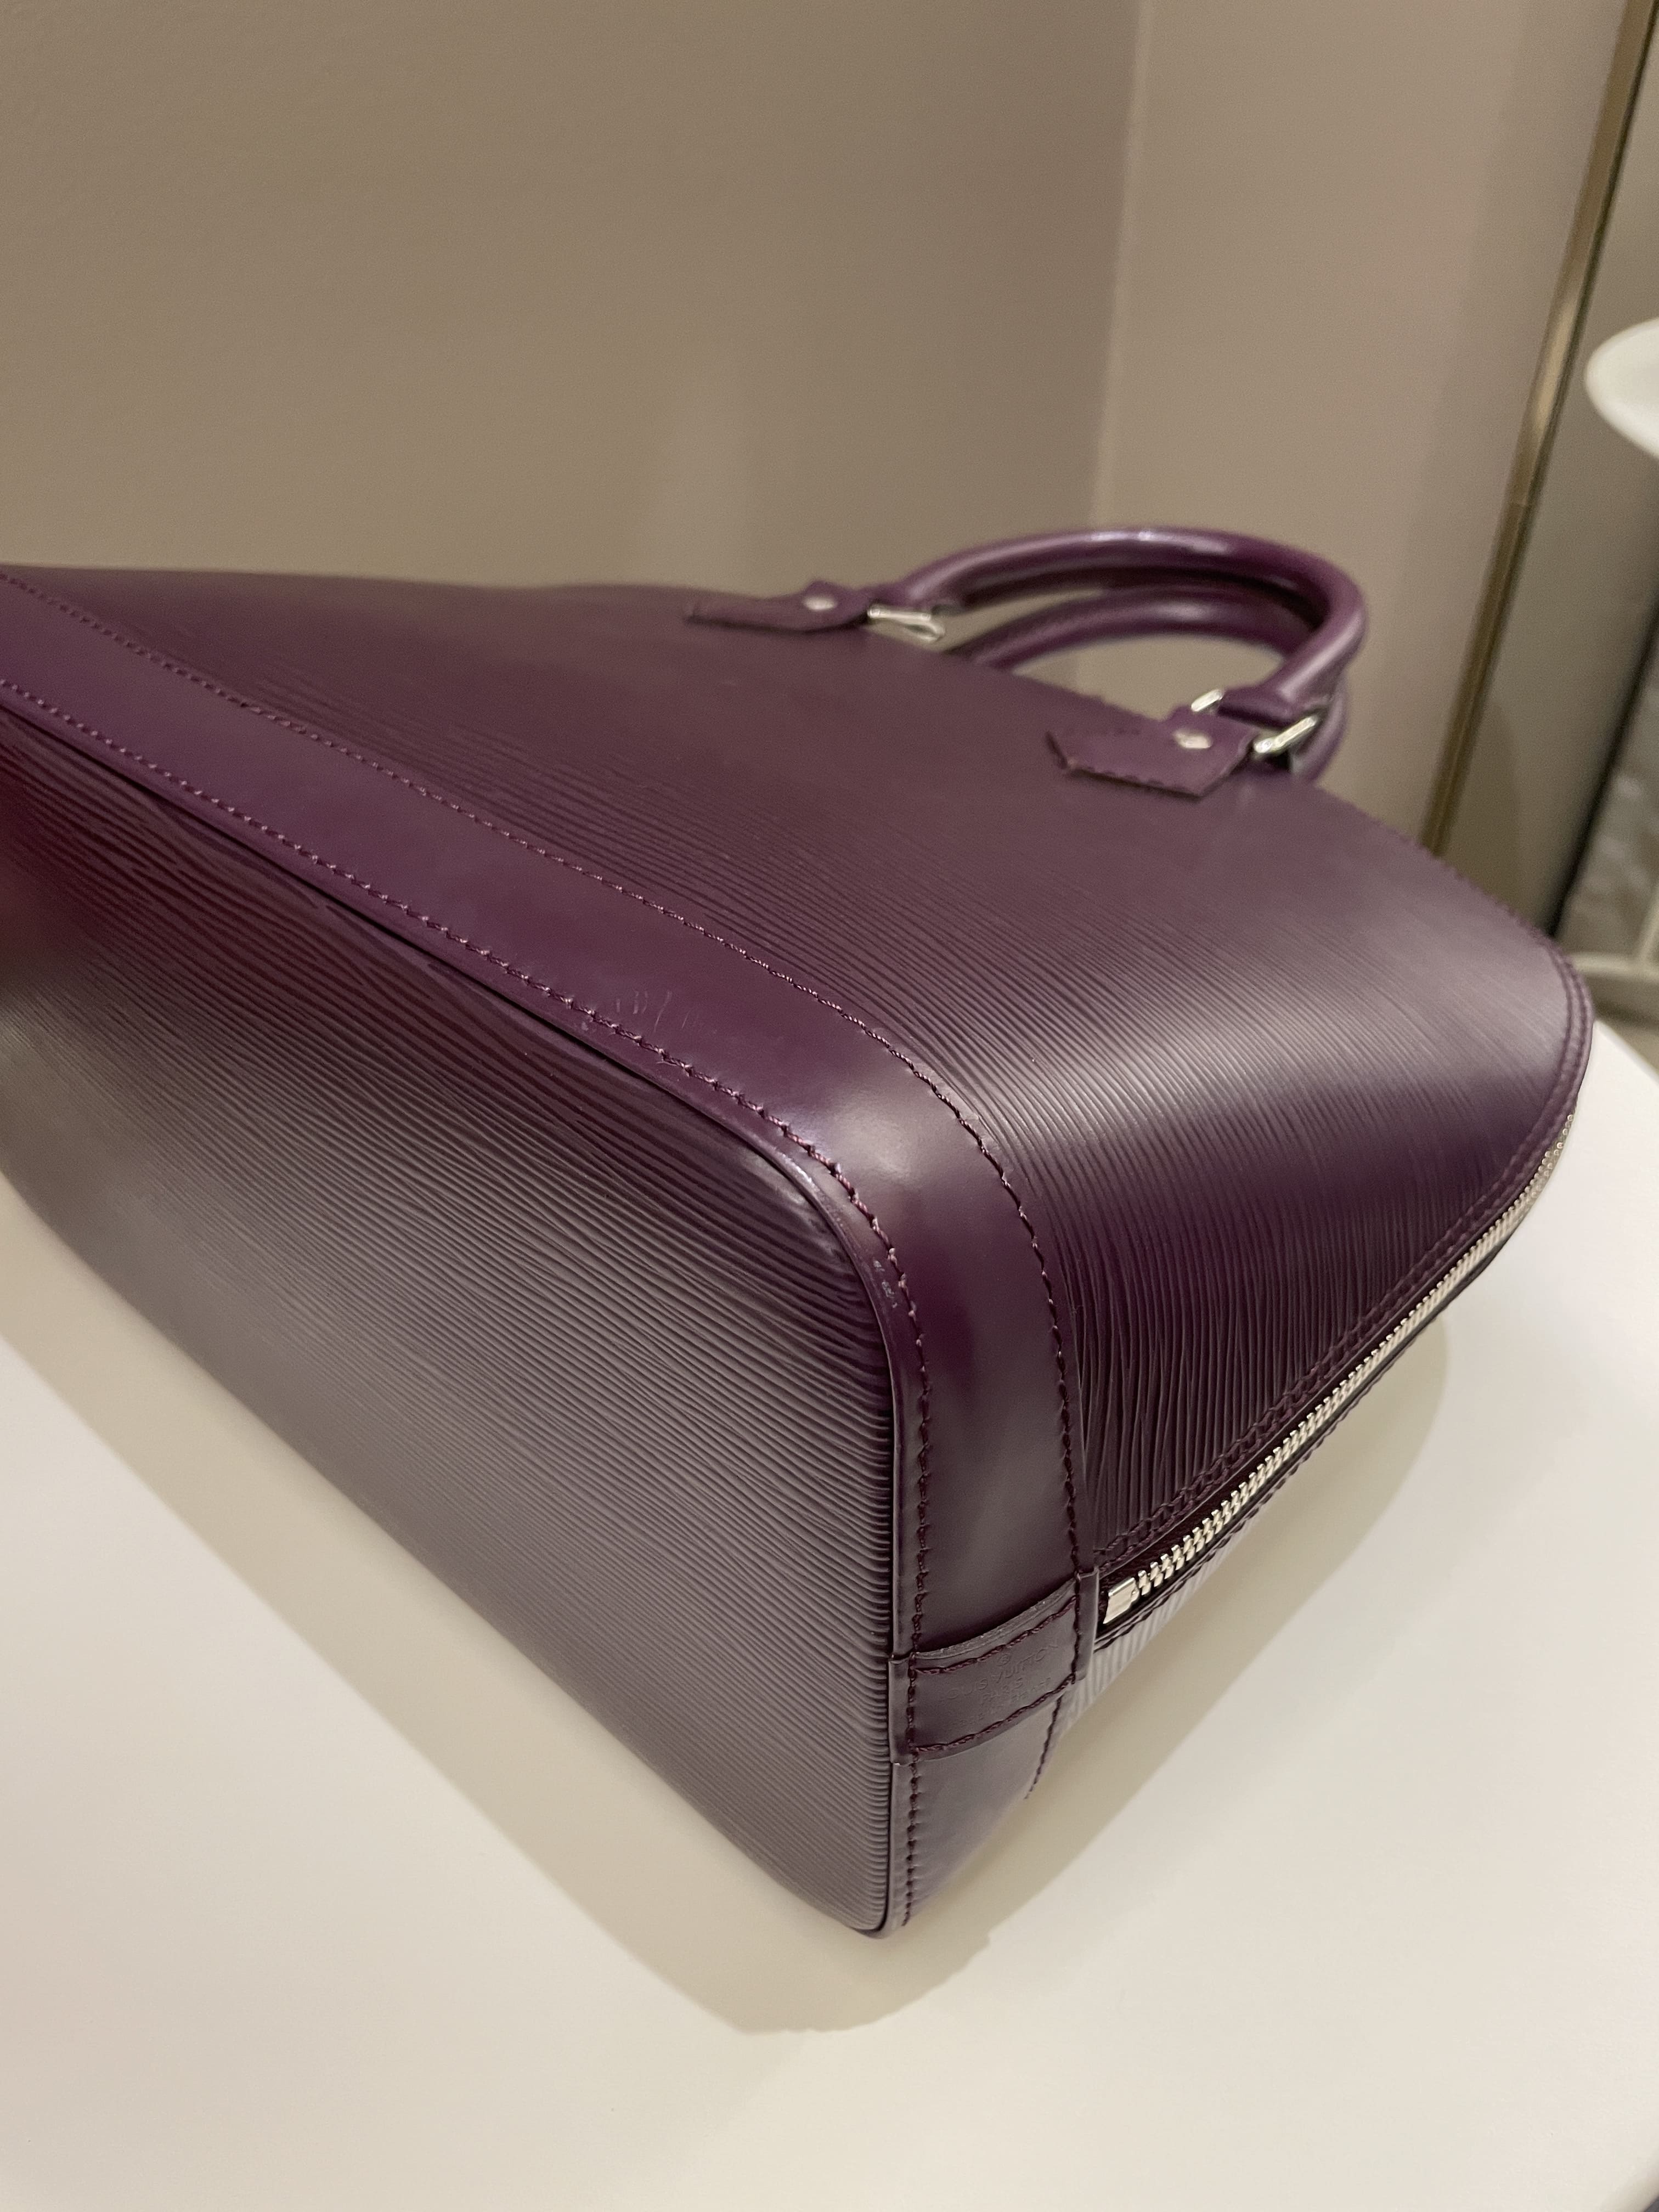 Louis Vuitton Cassis Epi Leather Alma PM Silver Hardware, 2008 Available  For Immediate Sale At Sotheby's